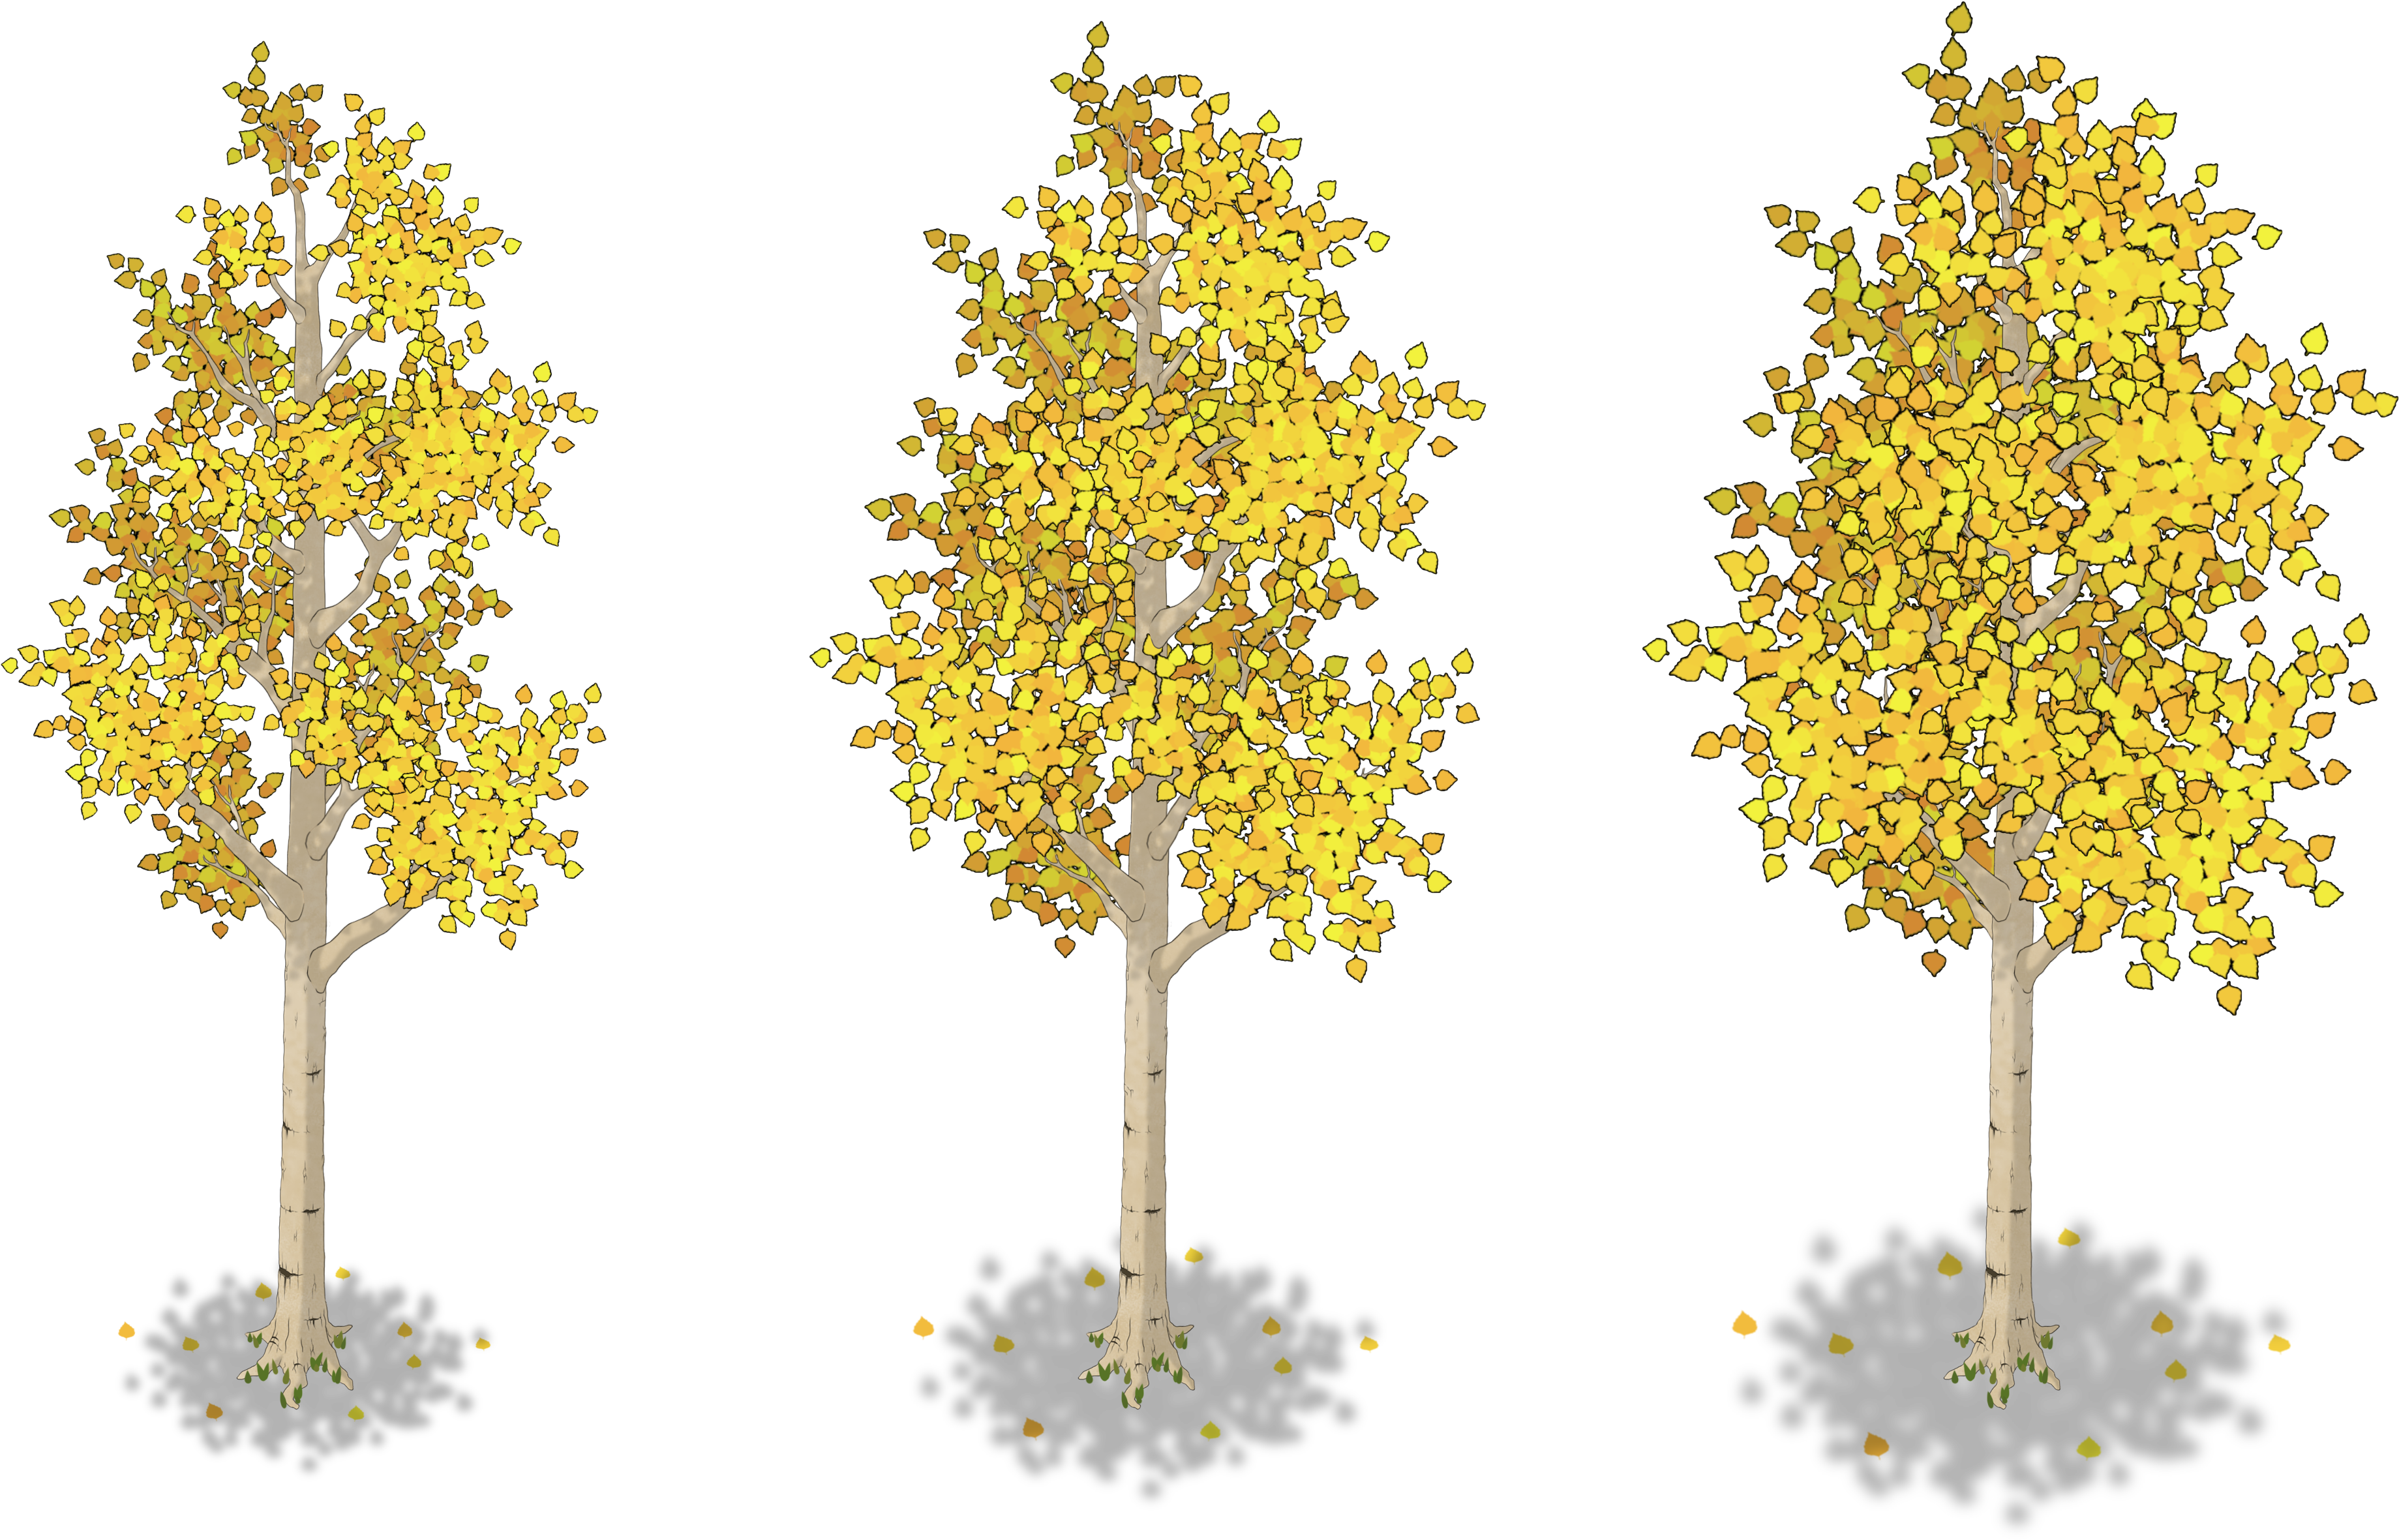 Initially, I Intended For The Trees To Be Animated - Plane-tree Family (4115x2626)